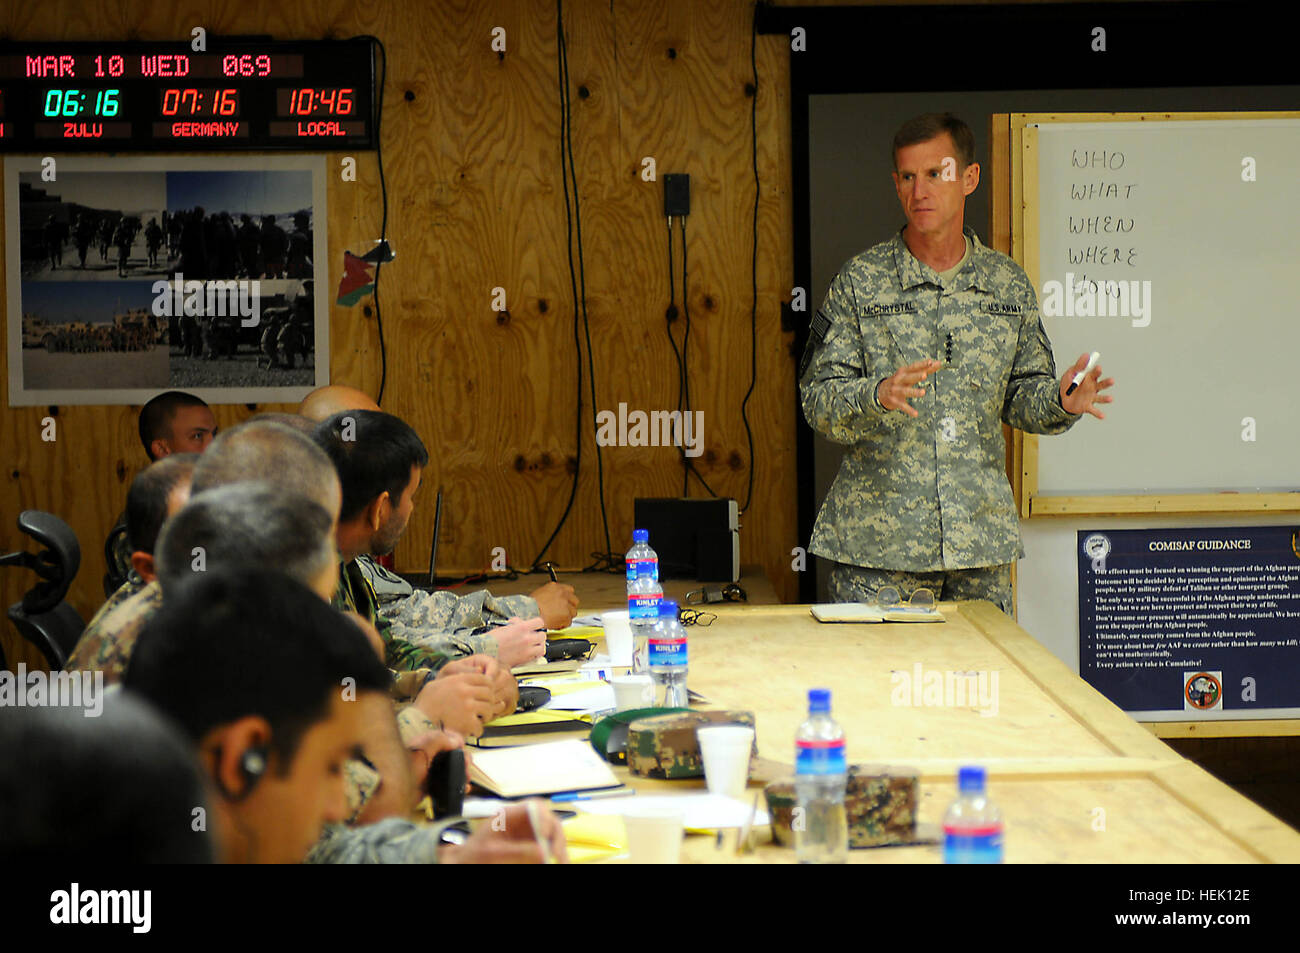 100310-A-0884S-002: LOGAR PROVINCE, Afghanistan – U.S. Army Gen. Stanley McChrystal, commander of International Security Assistance Force speaks to members of Task Force Bayonet during a visit to Forward Operating Base Shank, March 10.  McChrystal discussed current operations and the future of the counter-insurgency fight in Afghanistan.  “Were here, not to fight the war, but were here to win,” said McChrystal.  “And we win through the people.”  (Photo by U.S. Army Pfc. Michael Sword, Task Force Bayonet Public Affairs) ISAF commander talks progress, future at FOB Shank 260553 Stock Photo